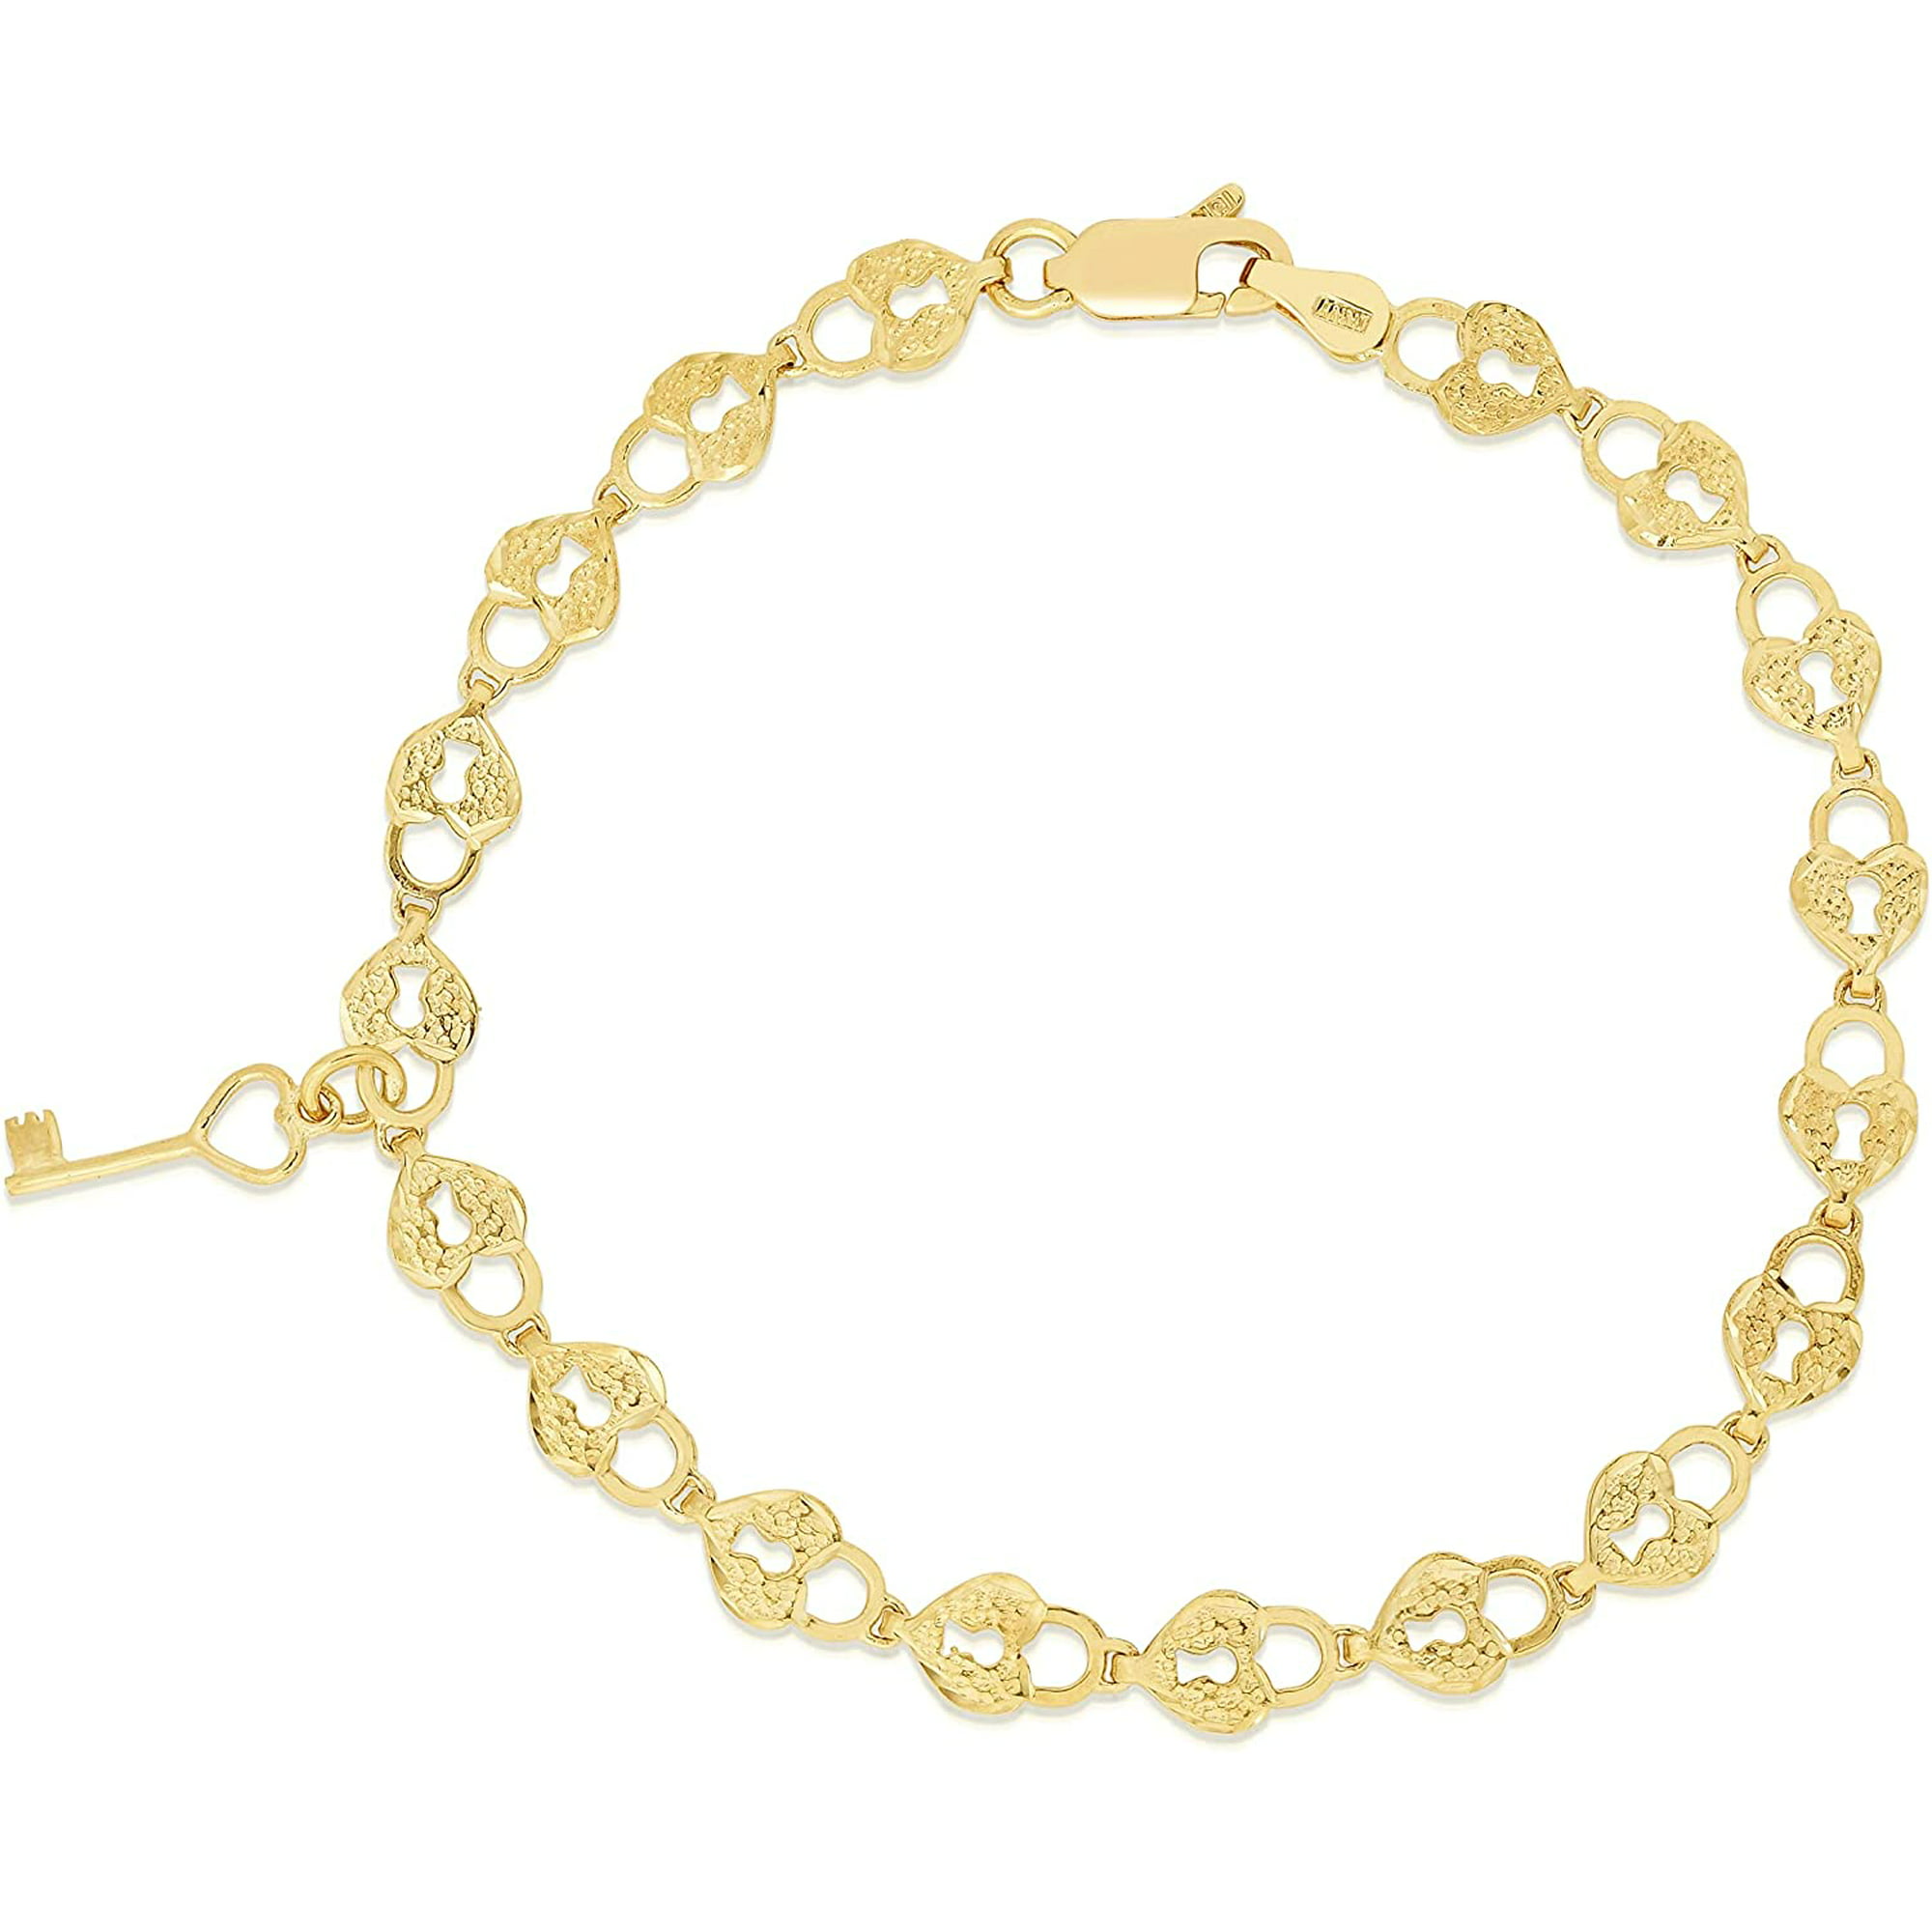 Key and Lock Charm Bracelet in 14K Yellow Gold 7.5